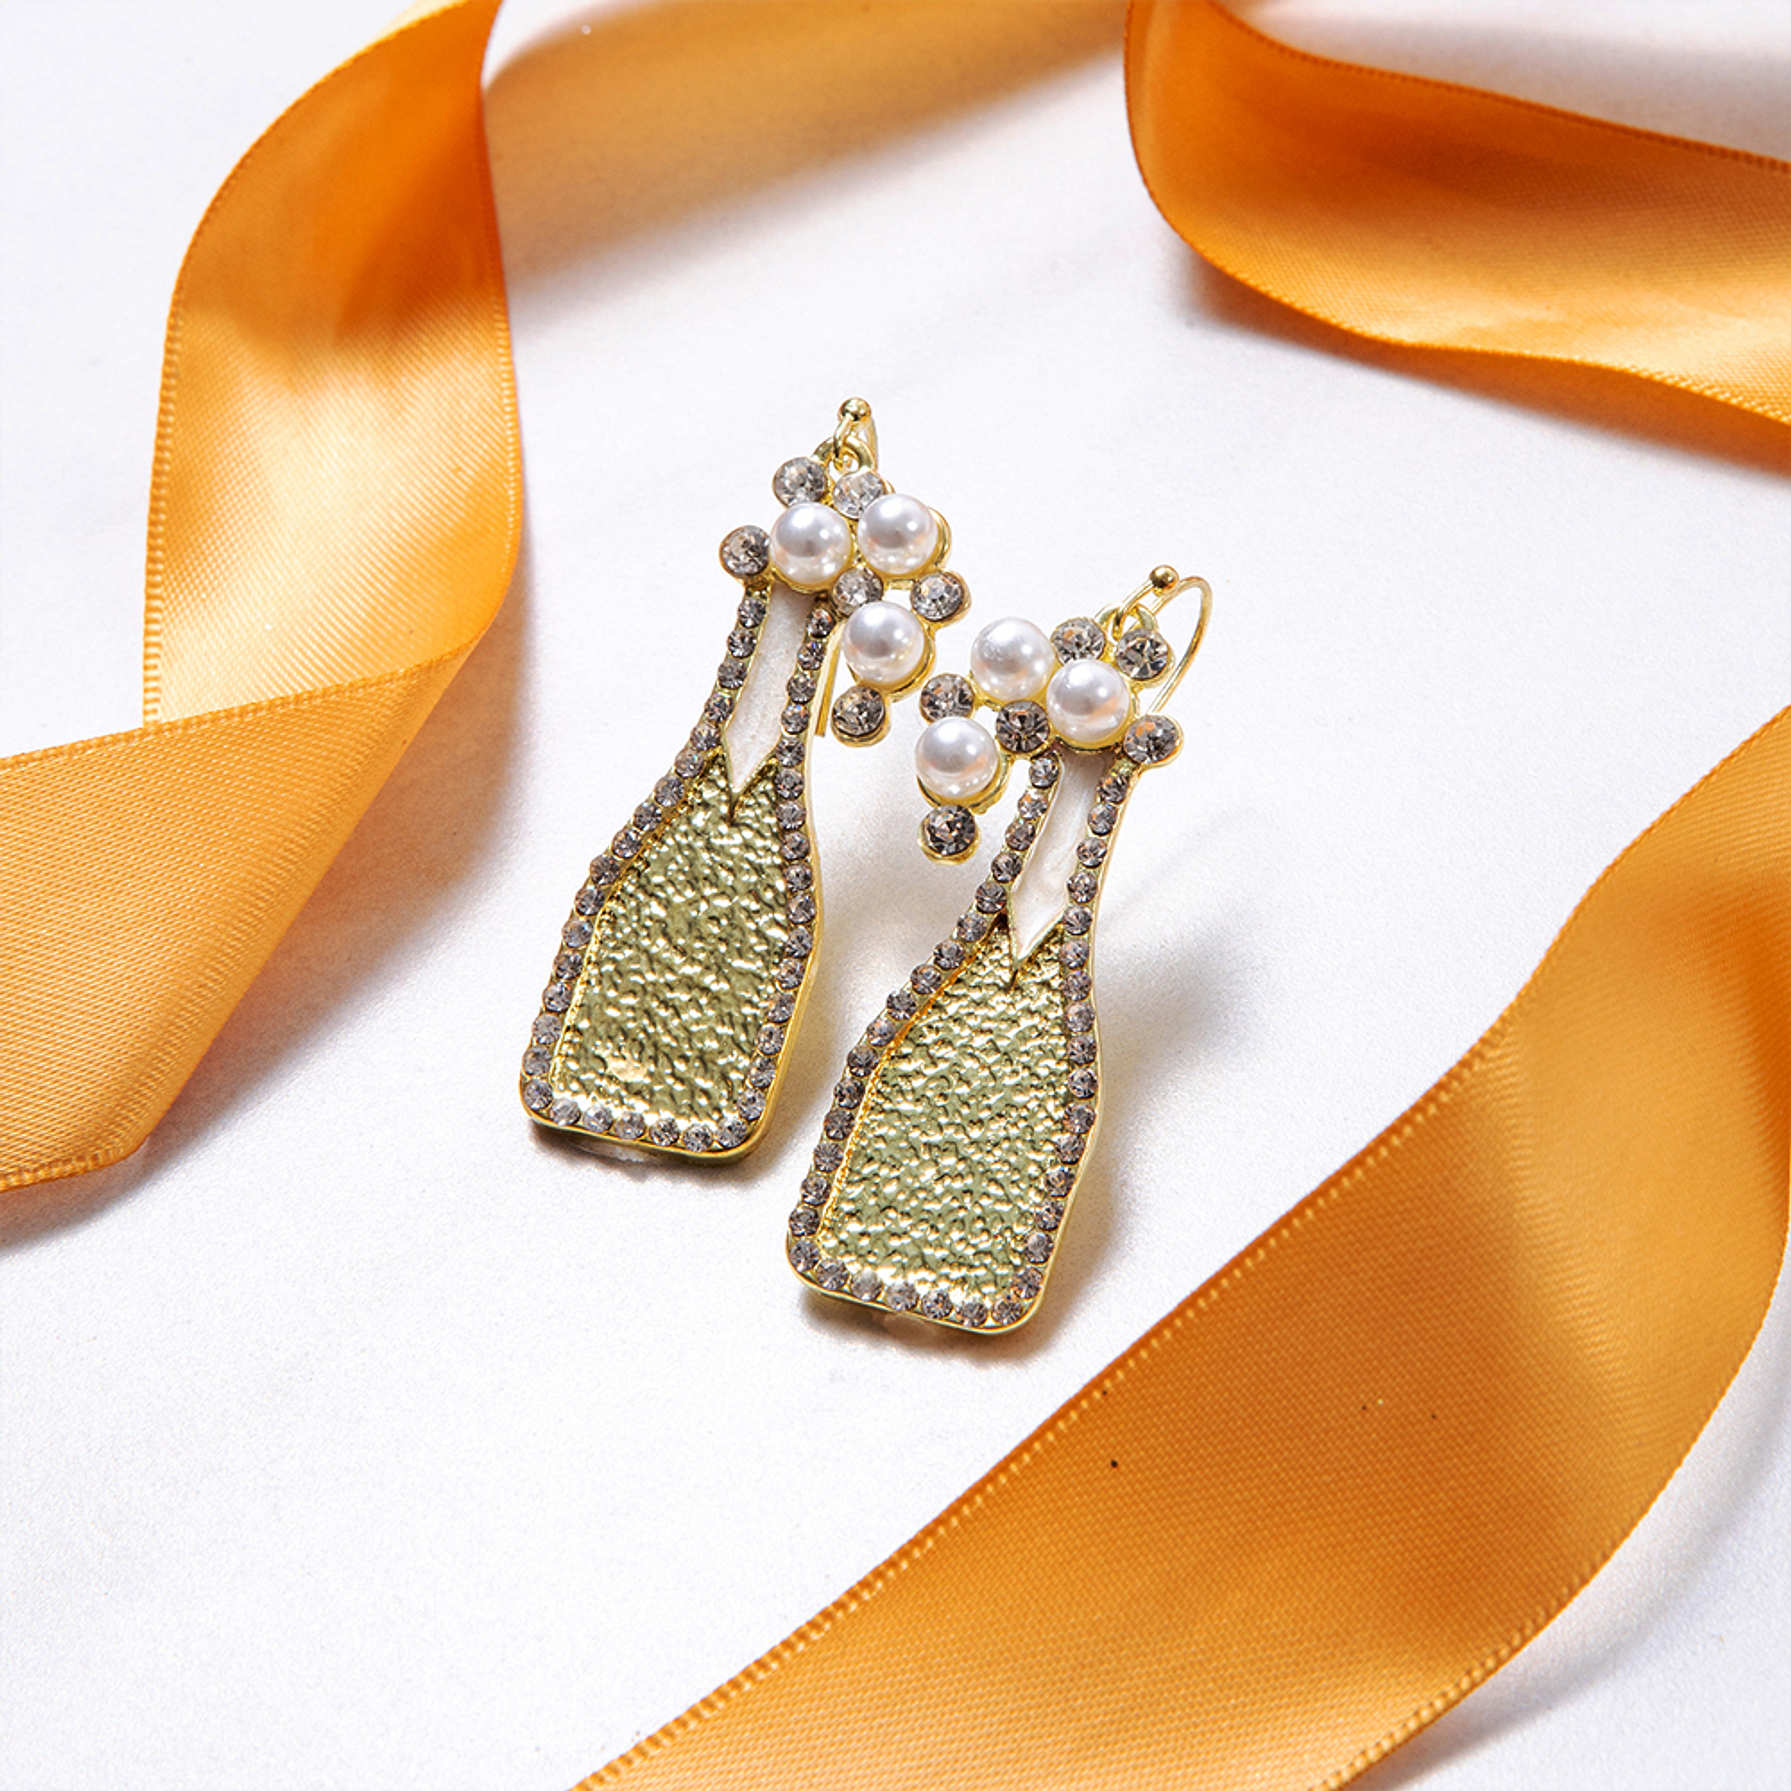 Statement Champagne Earrings - Marleylilly